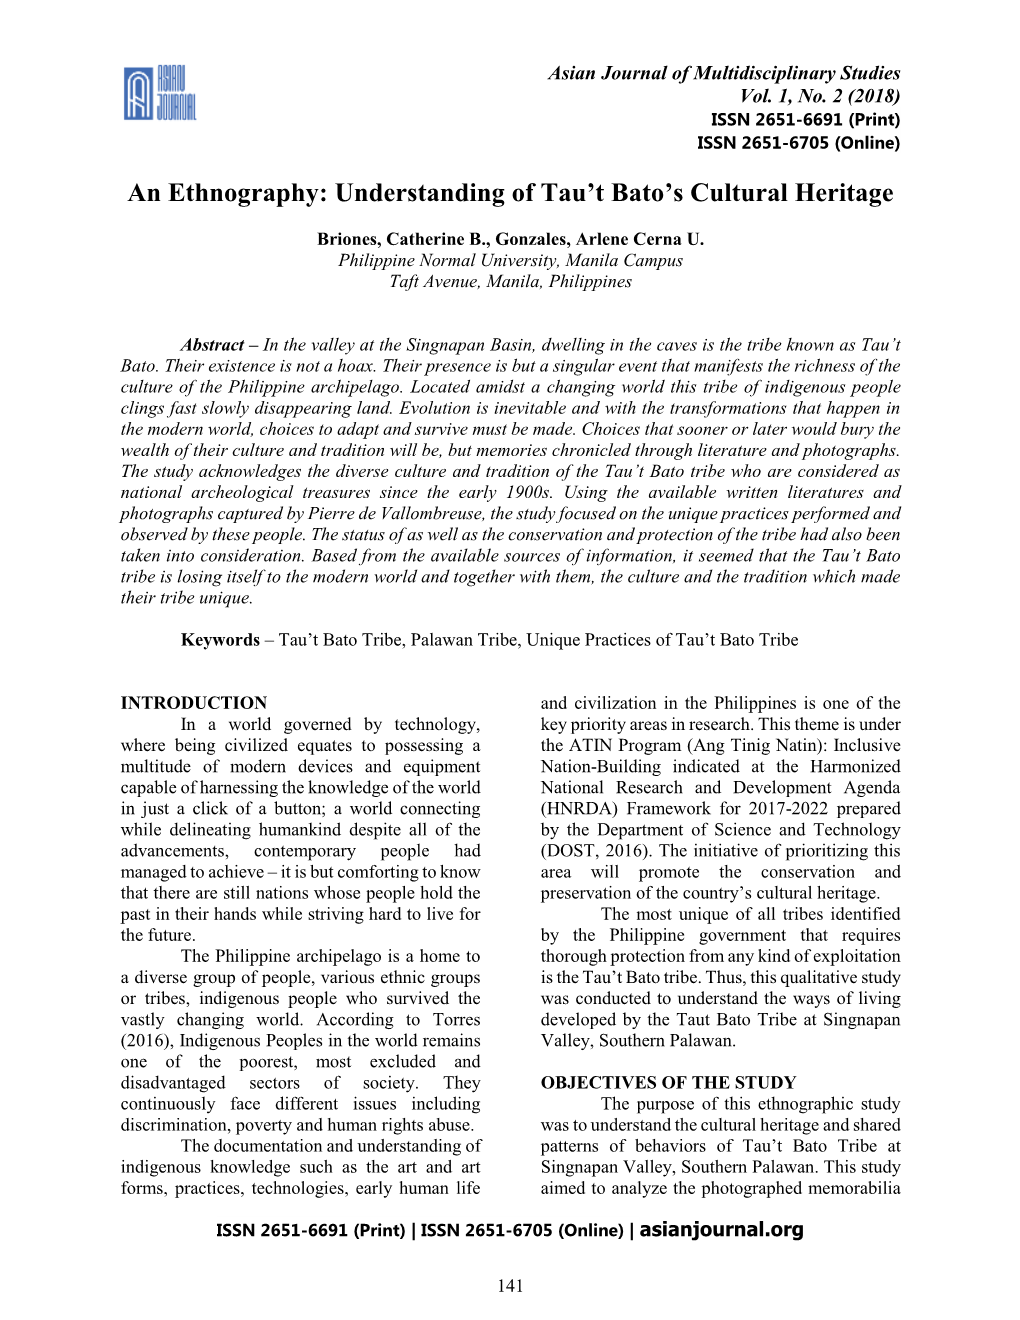 An Ethnography: Understanding of Tau't Bato's Cultural Heritage